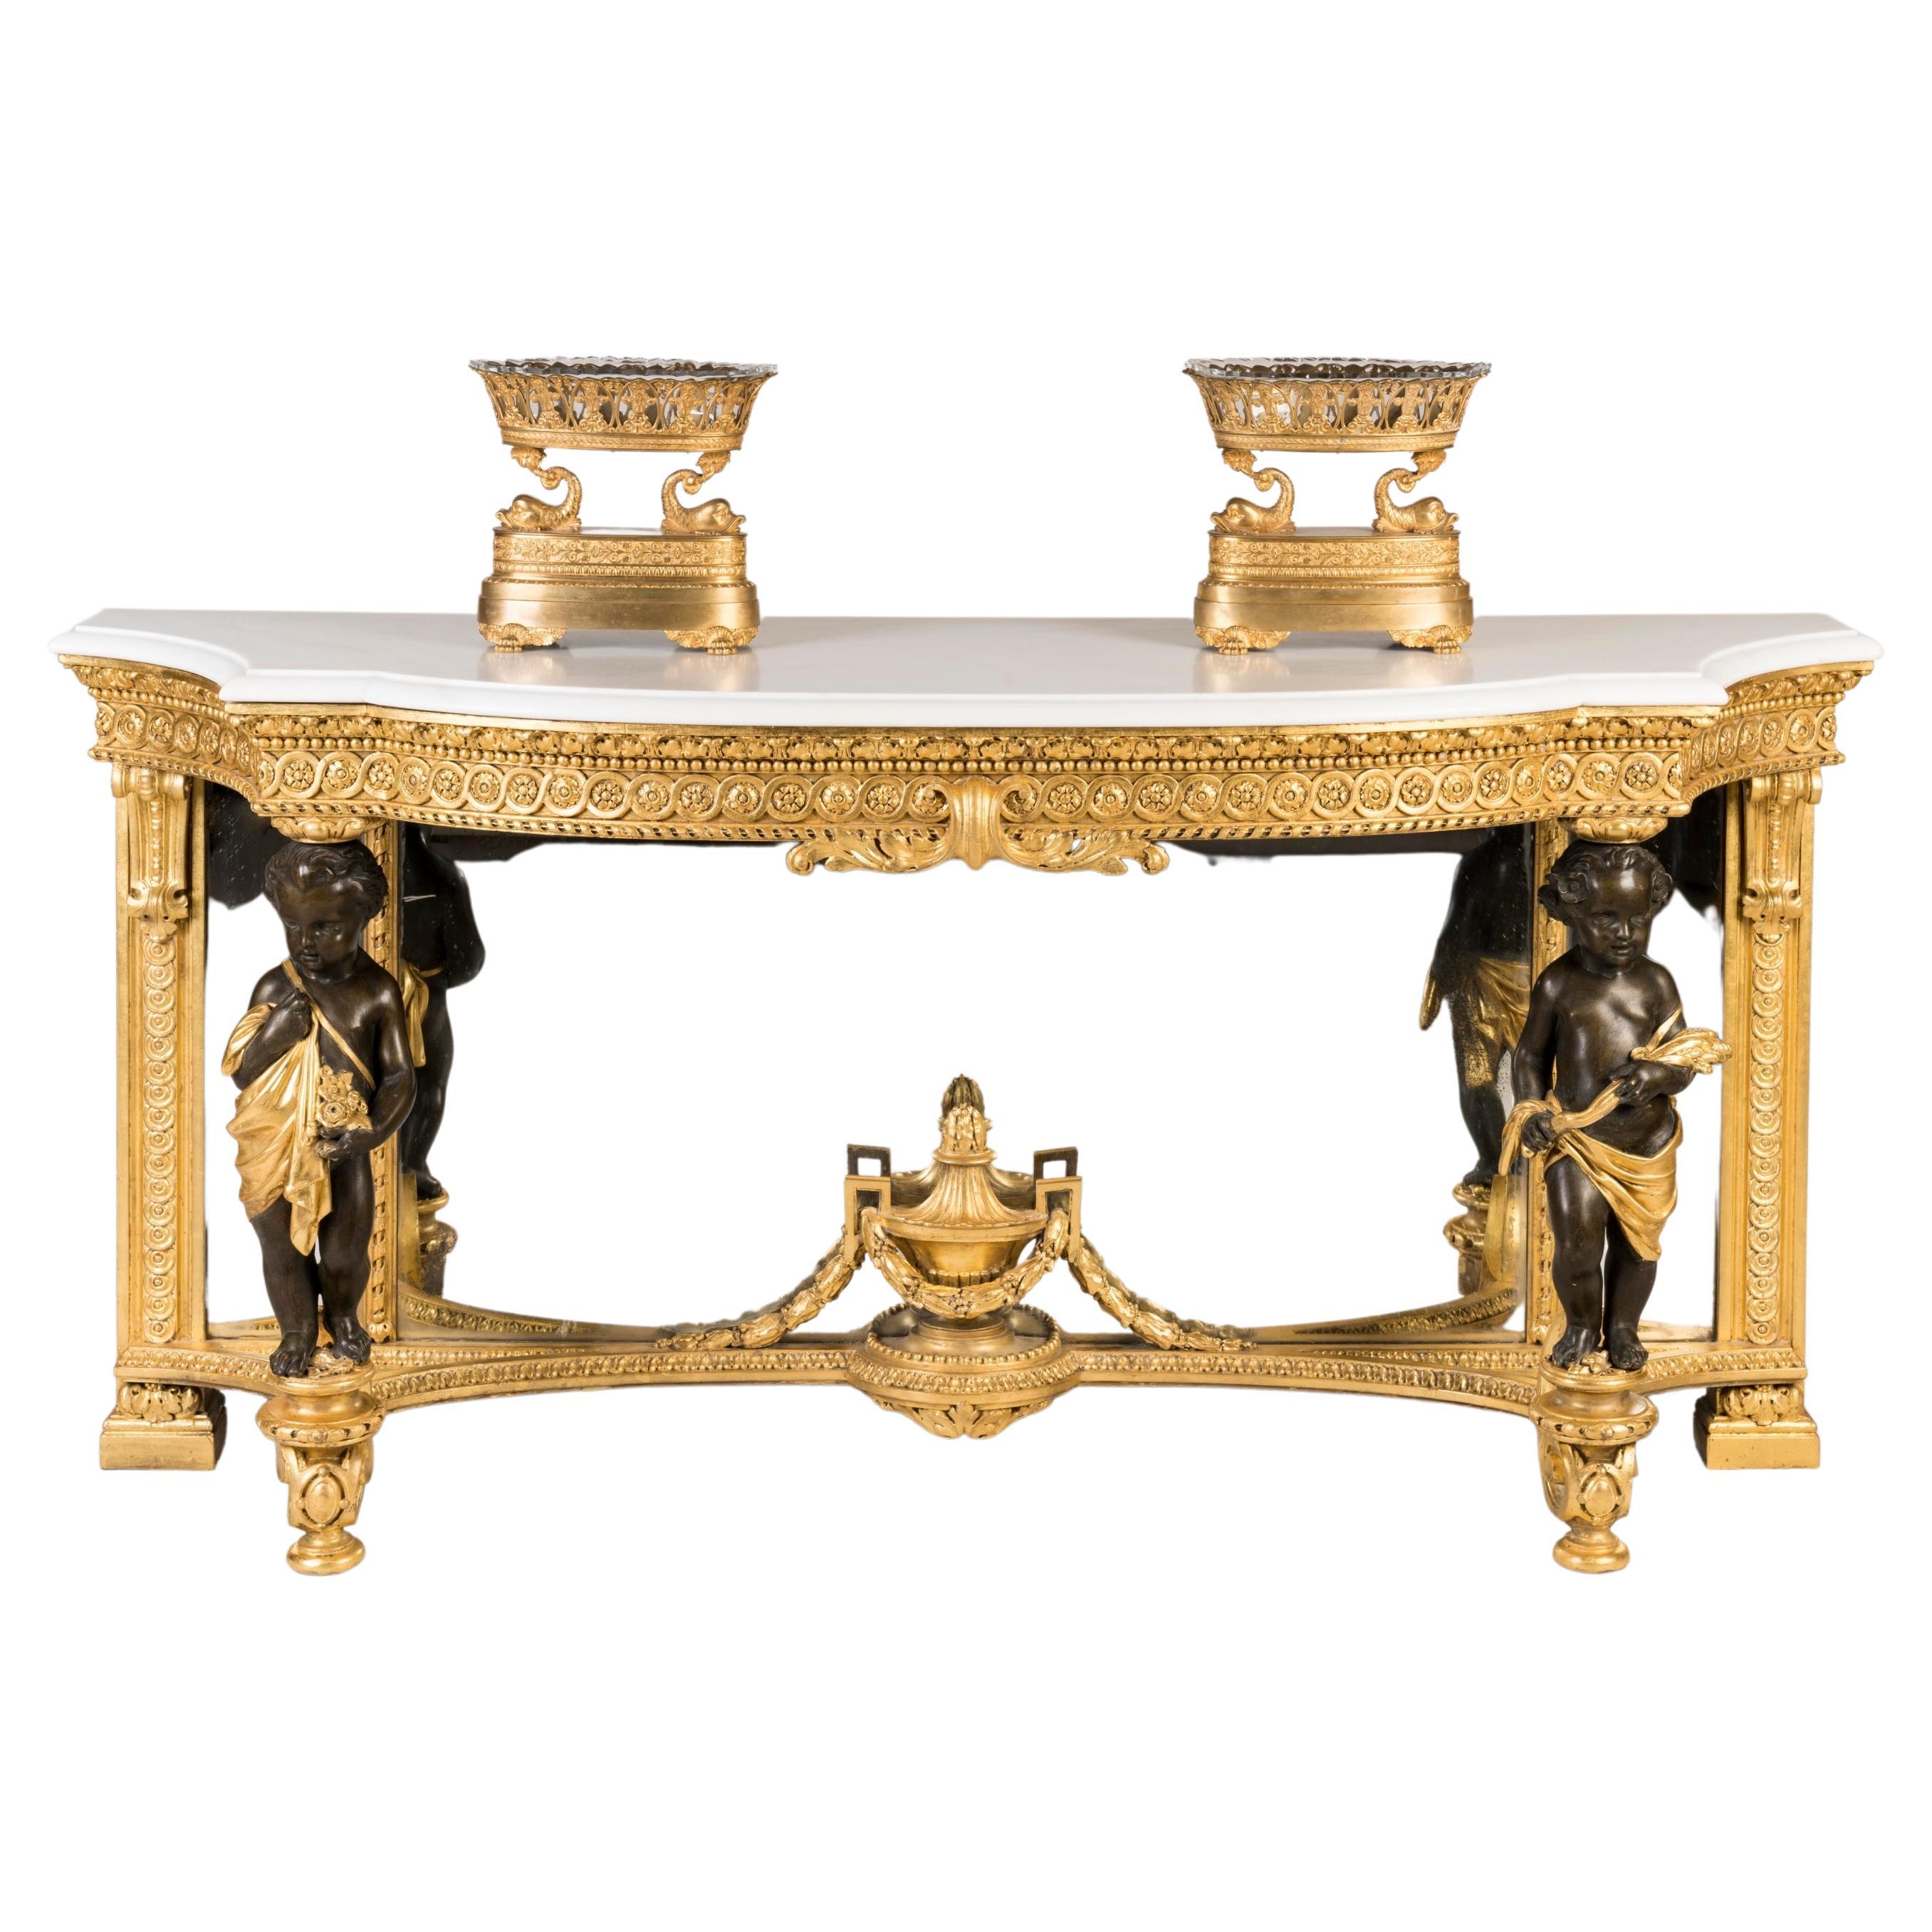 19th Century Italian Giltwood Console Table with Cherubs and Marble Top